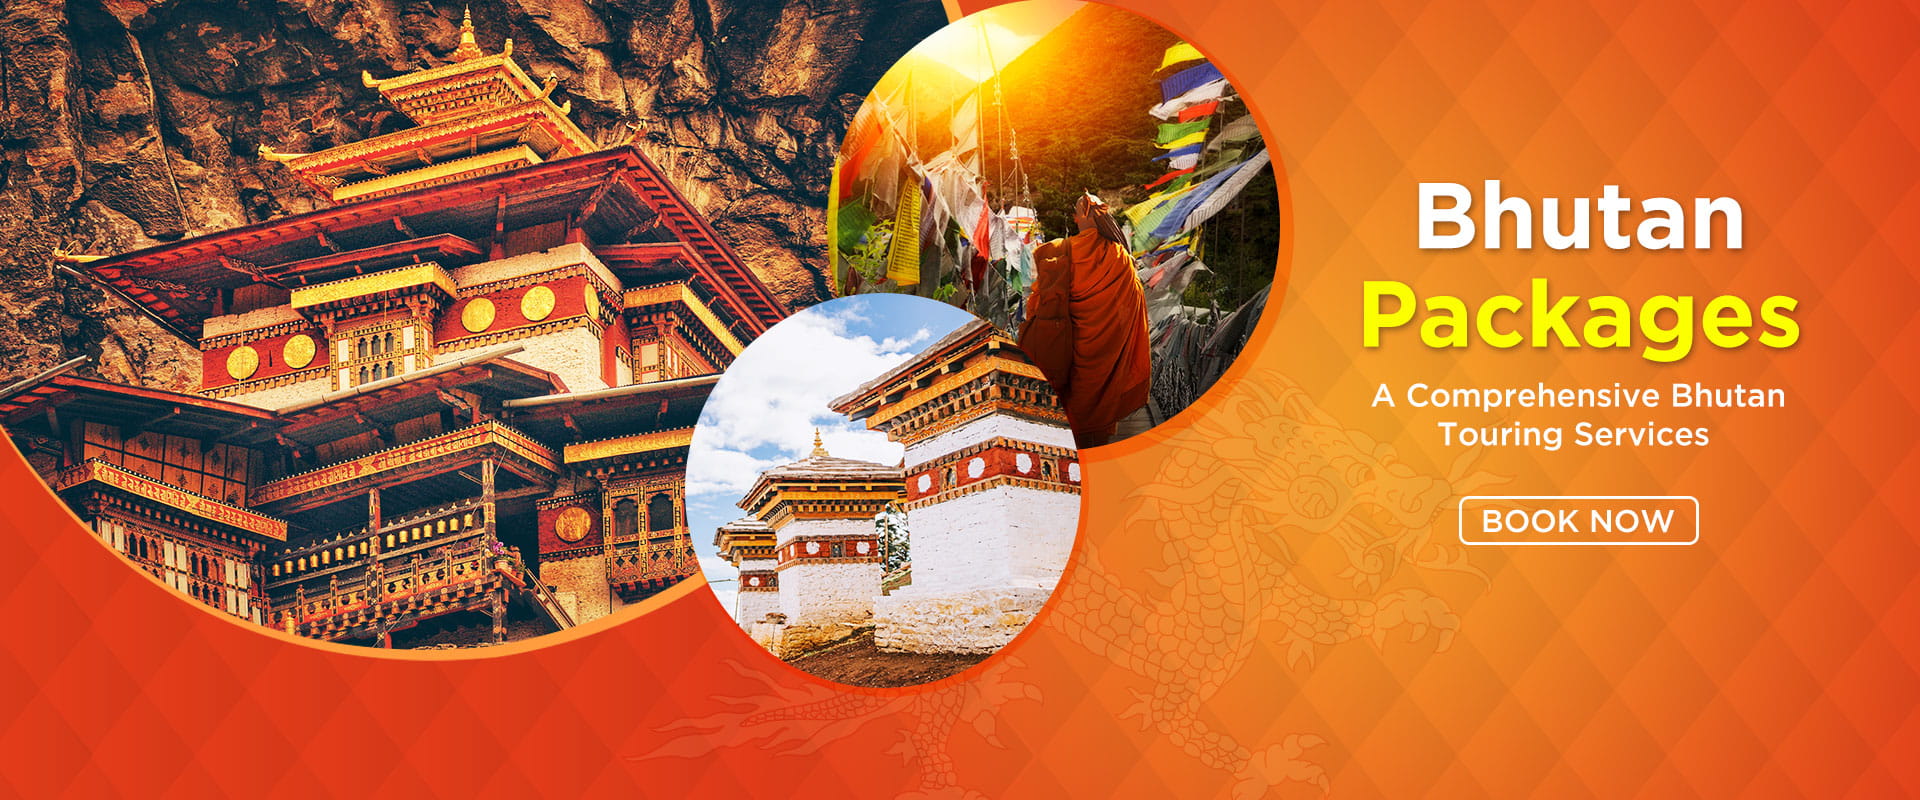 Book Bhutan Holiday Travel Packages